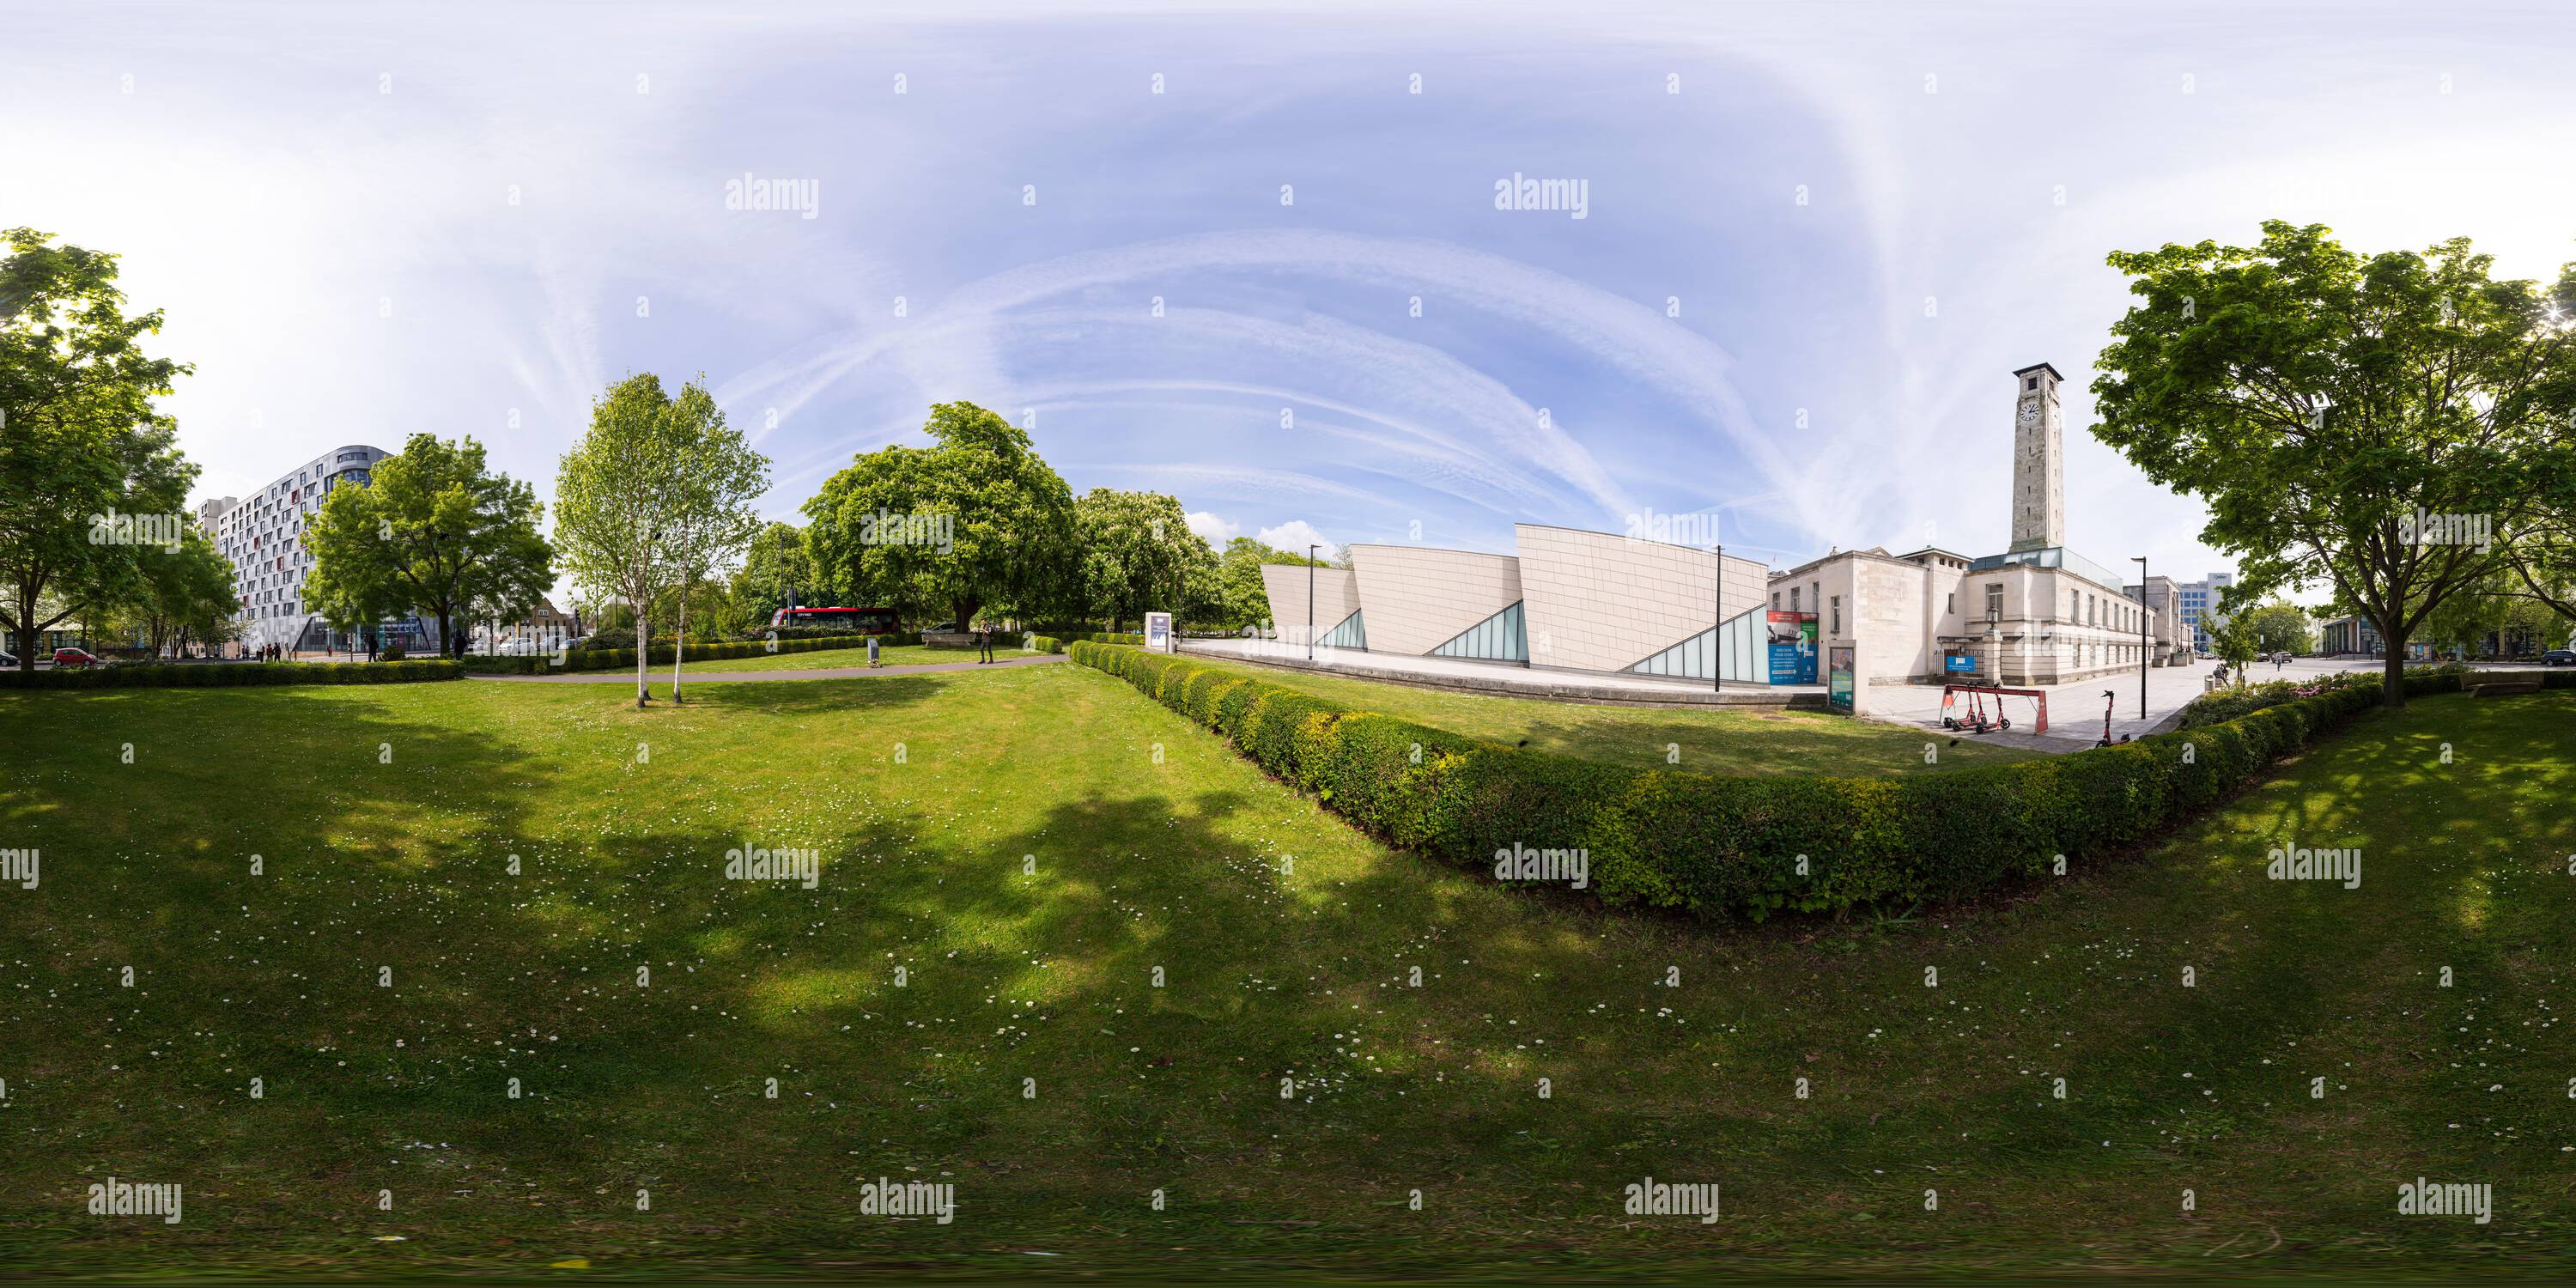 360 degree panoramic view of The SeaCity Museum at the Civic Centre in Southampton, England, opened in 2012 on the centenary of RMS Titanic's departure.